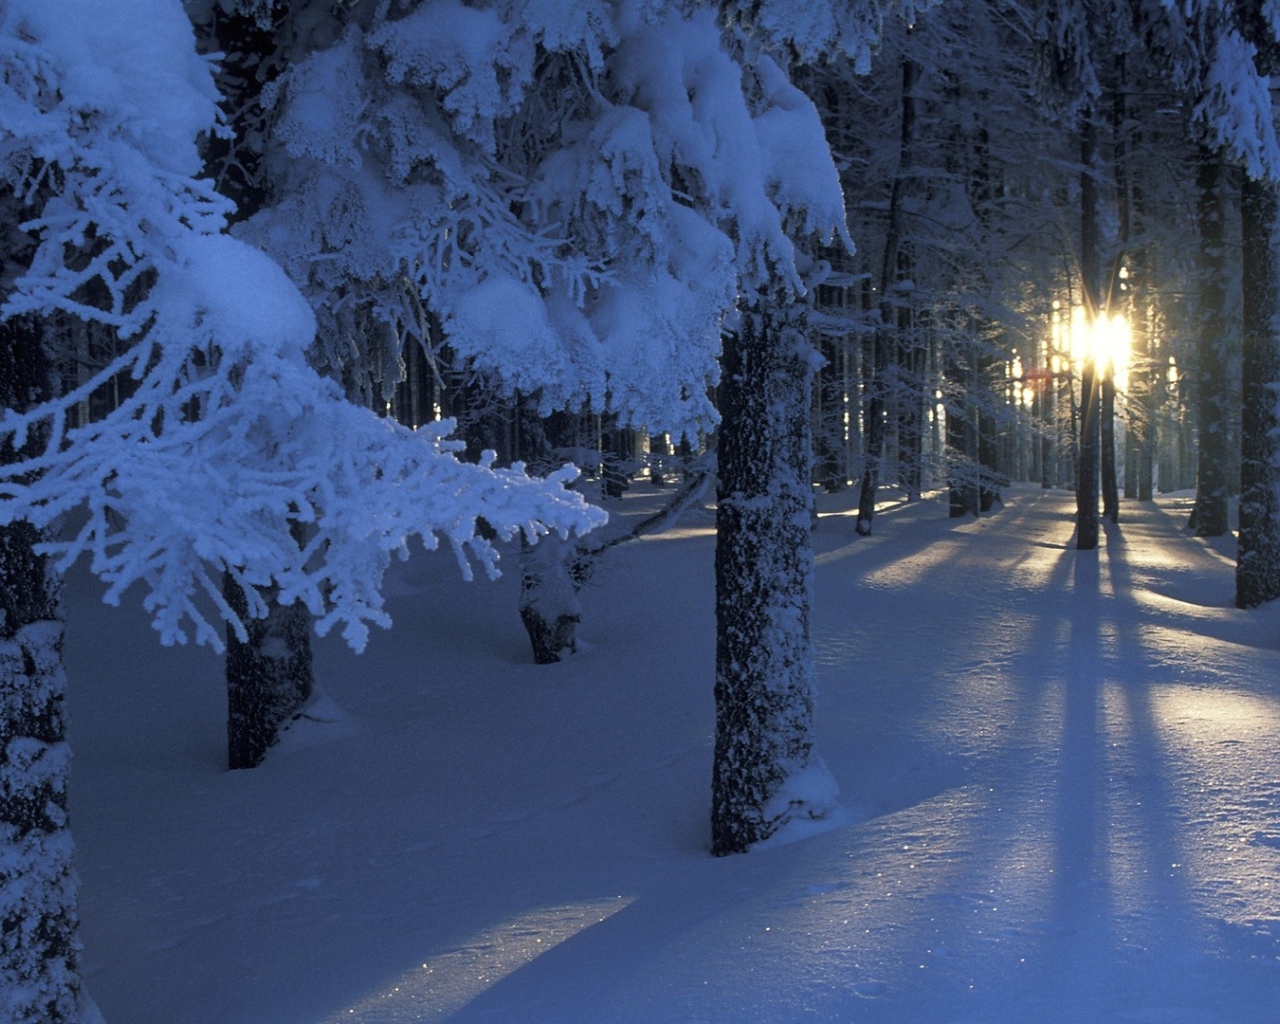 The sun is shining through the trees in the winter forest